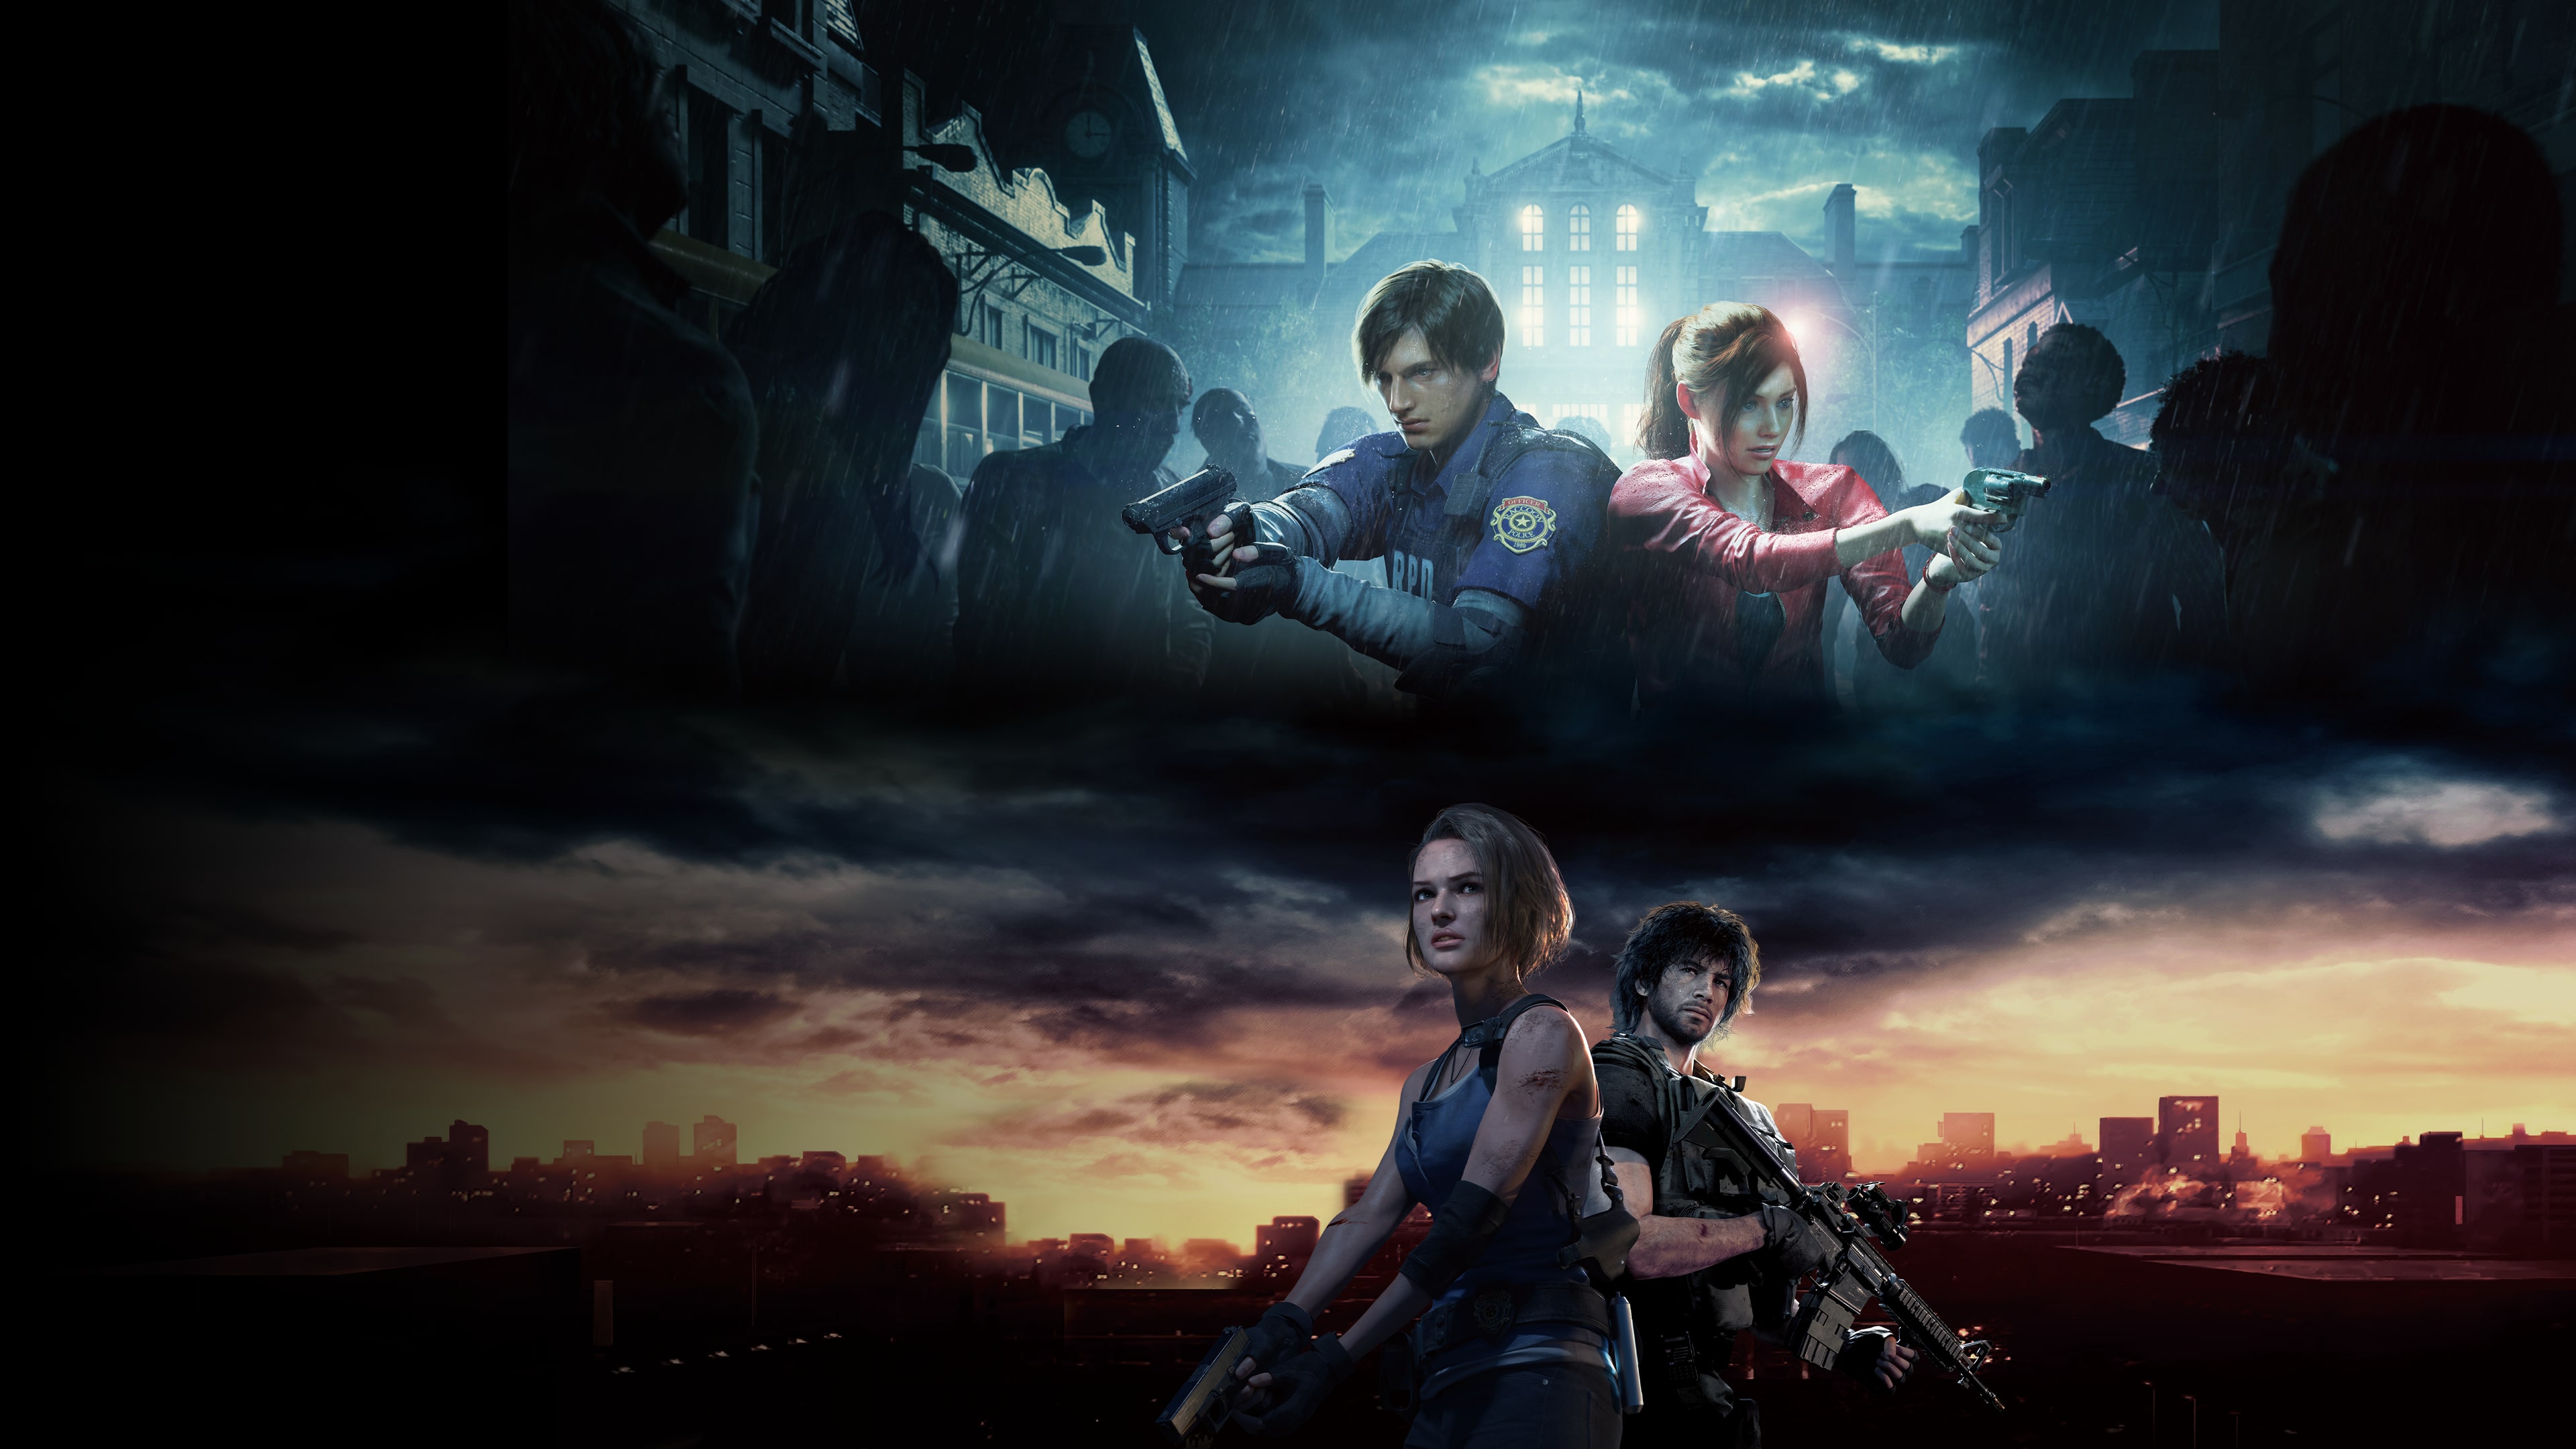 RACCOON CITY EDITION (Simplified Chinese, English, Korean, Thai, Japanese, Traditional Chinese)